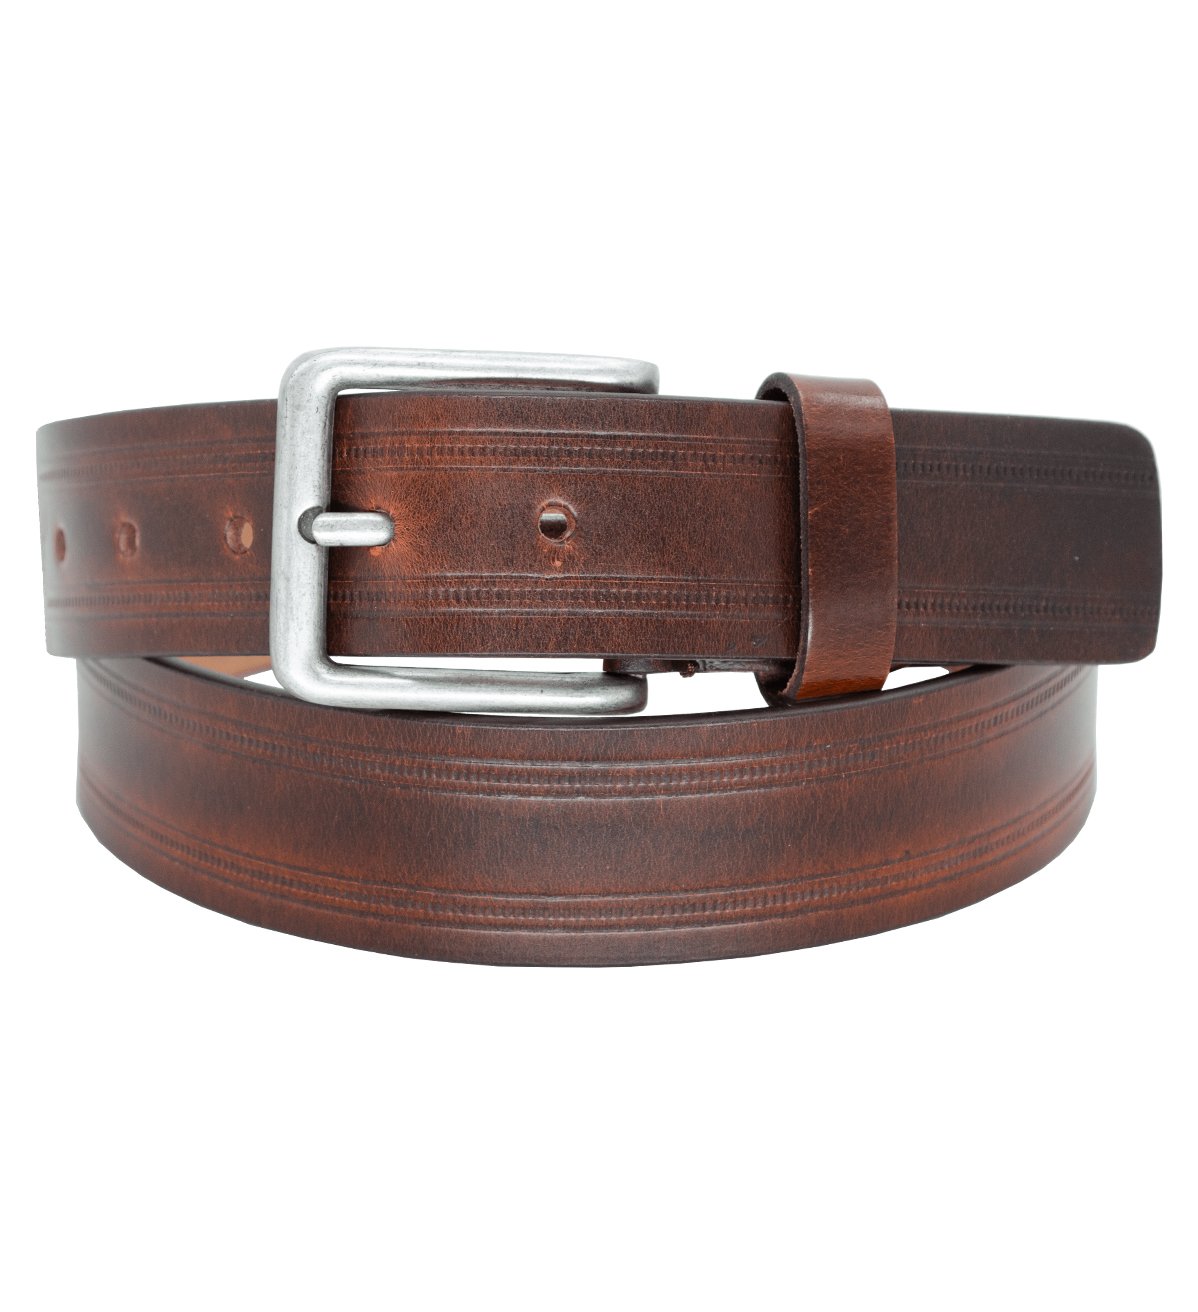 Men's Casual Genuine Leather Belt with Antique Silver Buckle - #BT-1539